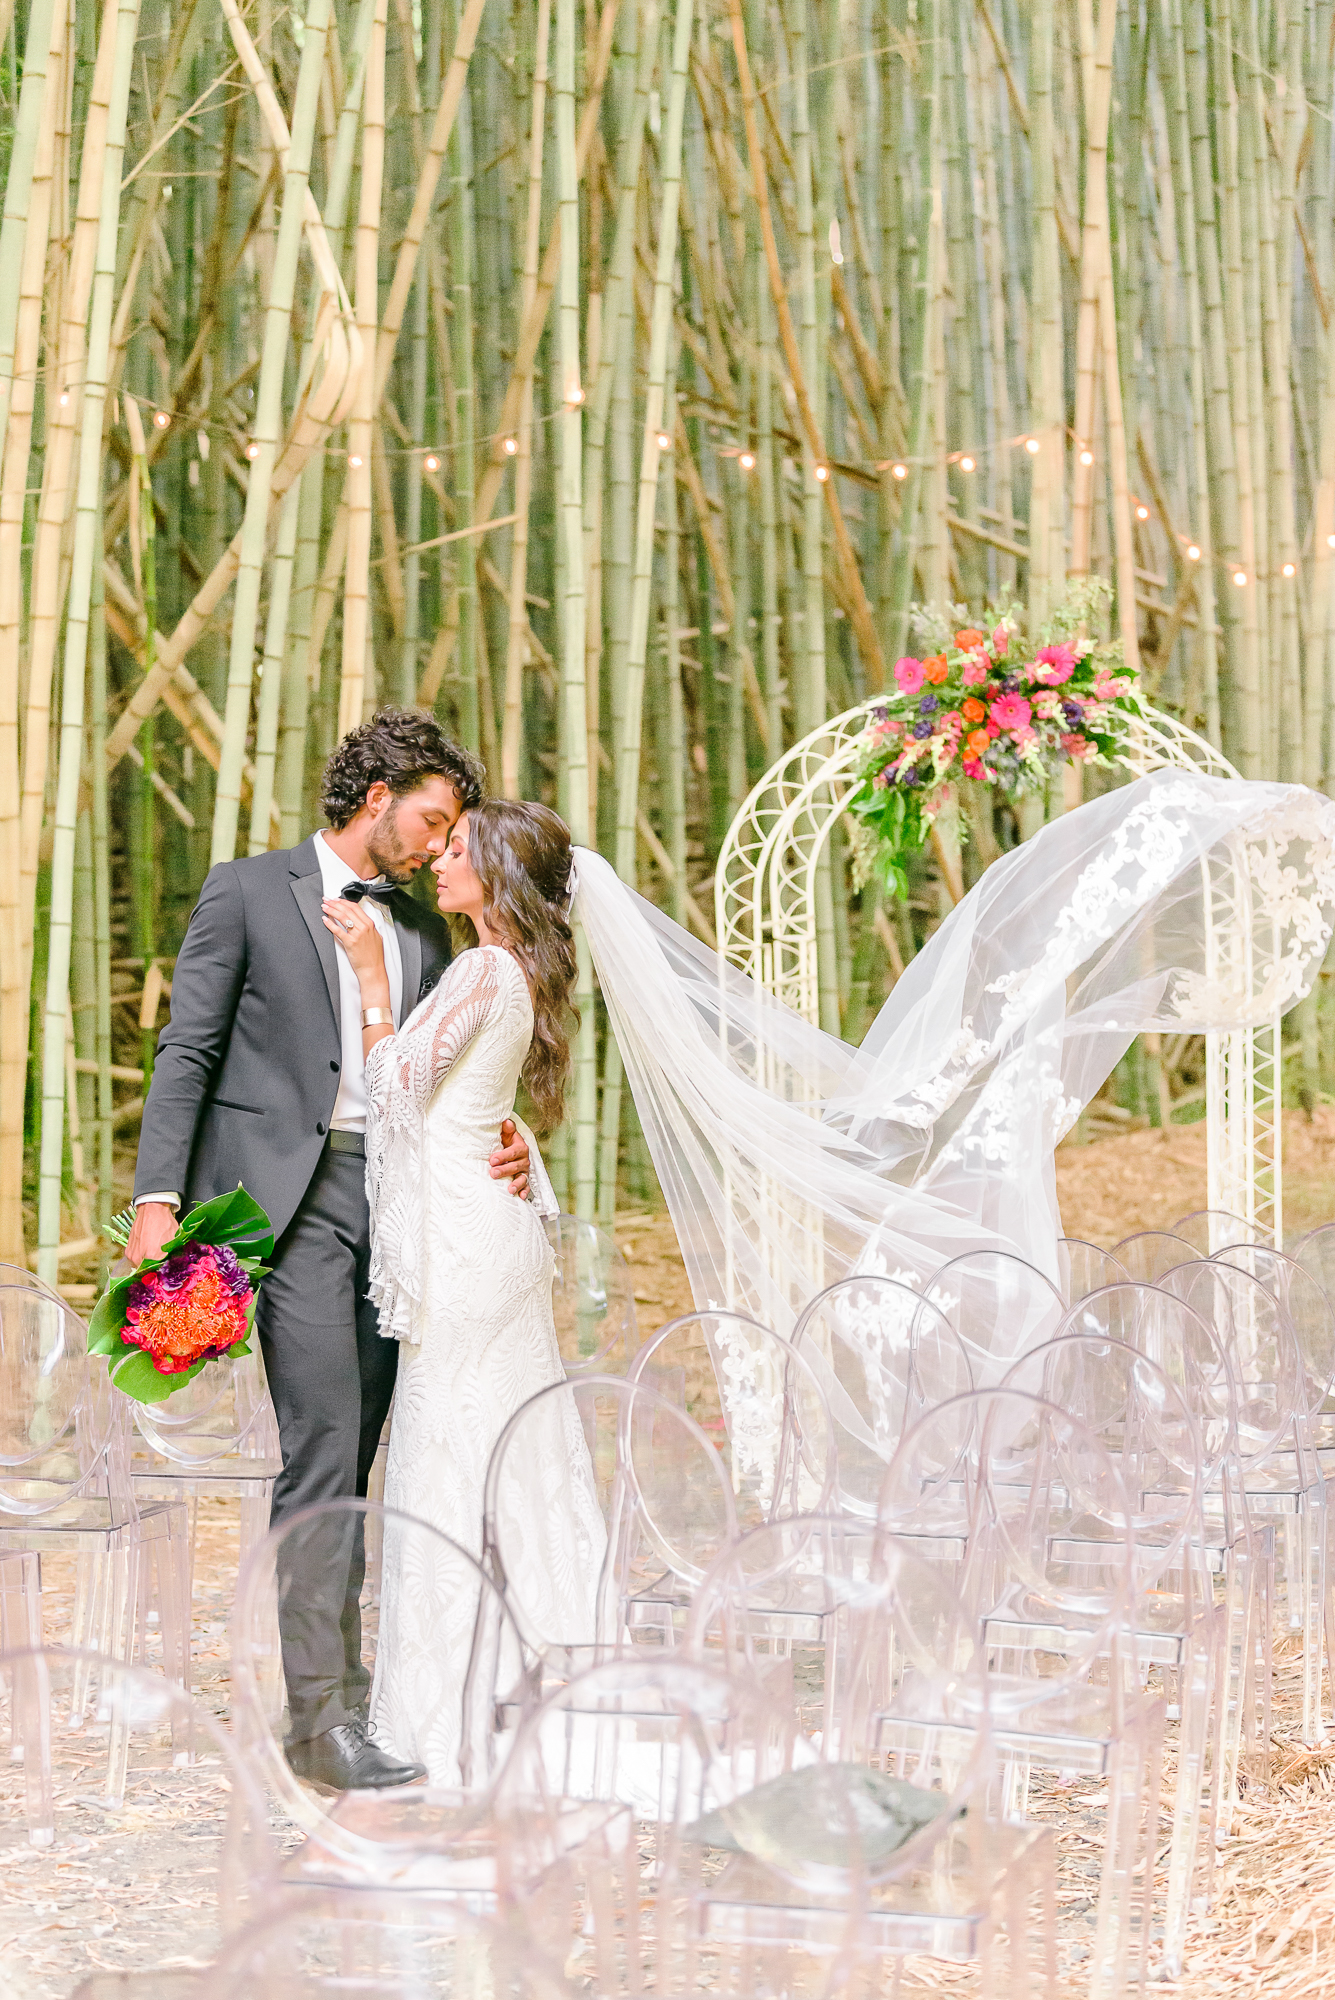 At this Belmont NC wedding venue, Kaelyn's veil blows in the wind behind her as she snuggles up to Trevor.